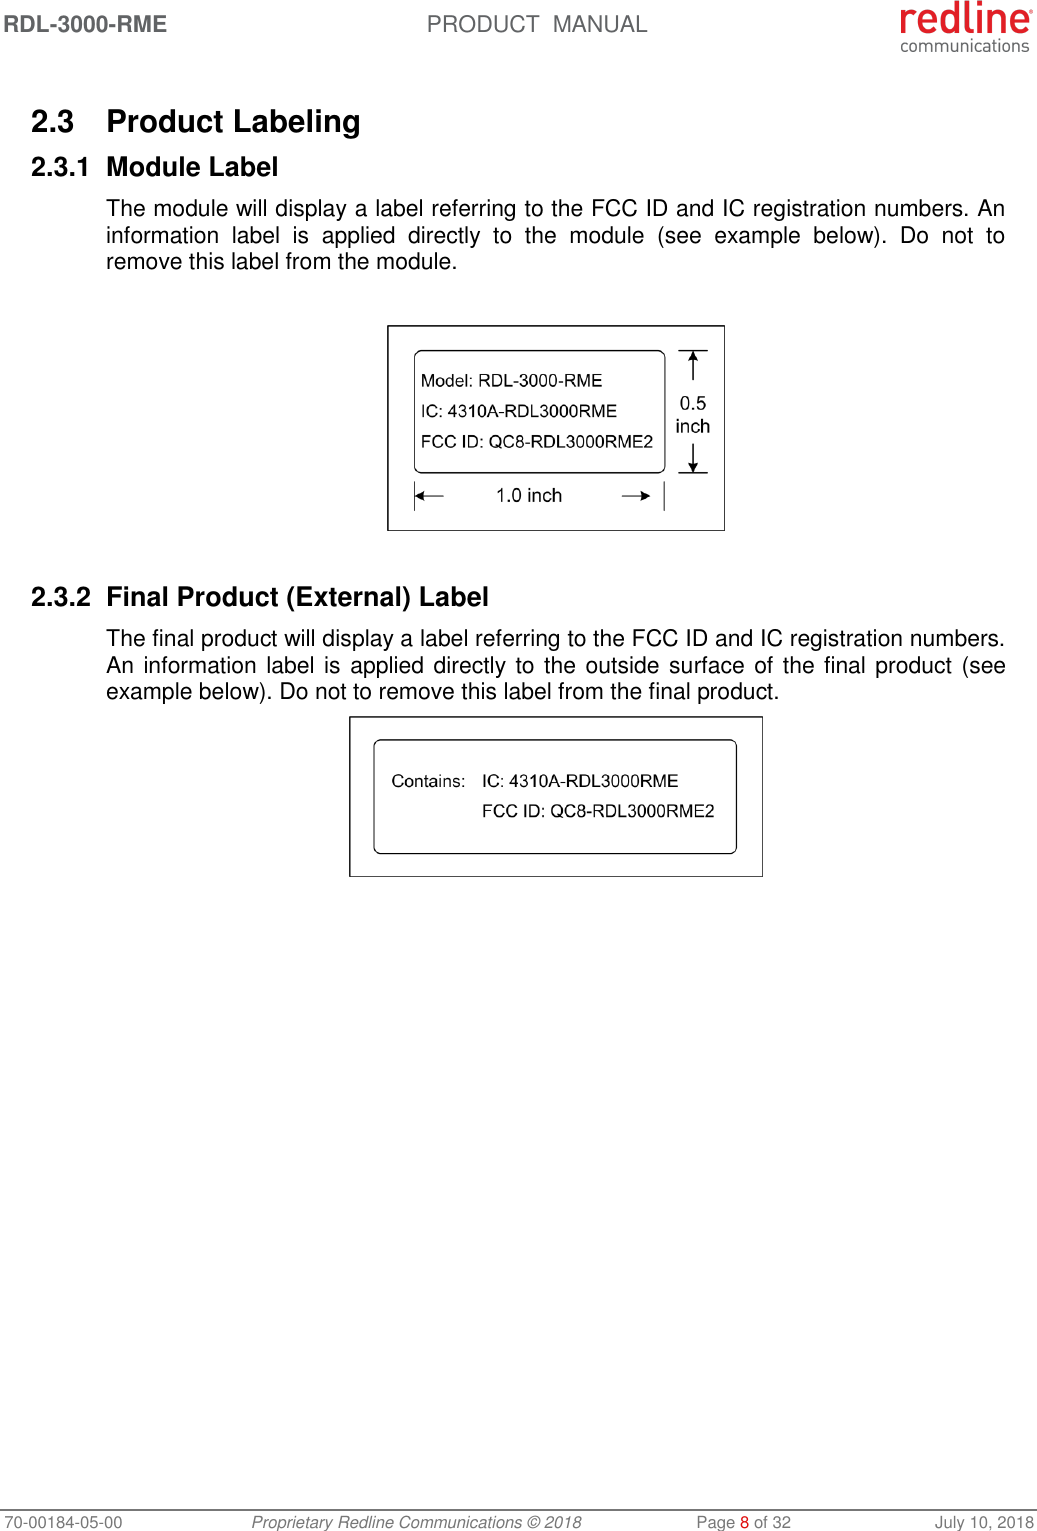 RDL-3000-RME  PRODUCT  MANUAL 70-00184-05-00 Proprietary Redline Communications © 2018  Page 8 of 32  July 10, 2018  2.3  Product Labeling 2.3.1  Module Label The module will display a label referring to the FCC ID and IC registration numbers. An information  label  is  applied  directly  to  the  module  (see  example  below).  Do  not  to remove this label from the module.    2.3.2 Final Product (External) Label The final product will display a label referring to the FCC ID and IC registration numbers. An information label is applied directly to the outside surface of the final product (see example below). Do not to remove this label from the final product.   